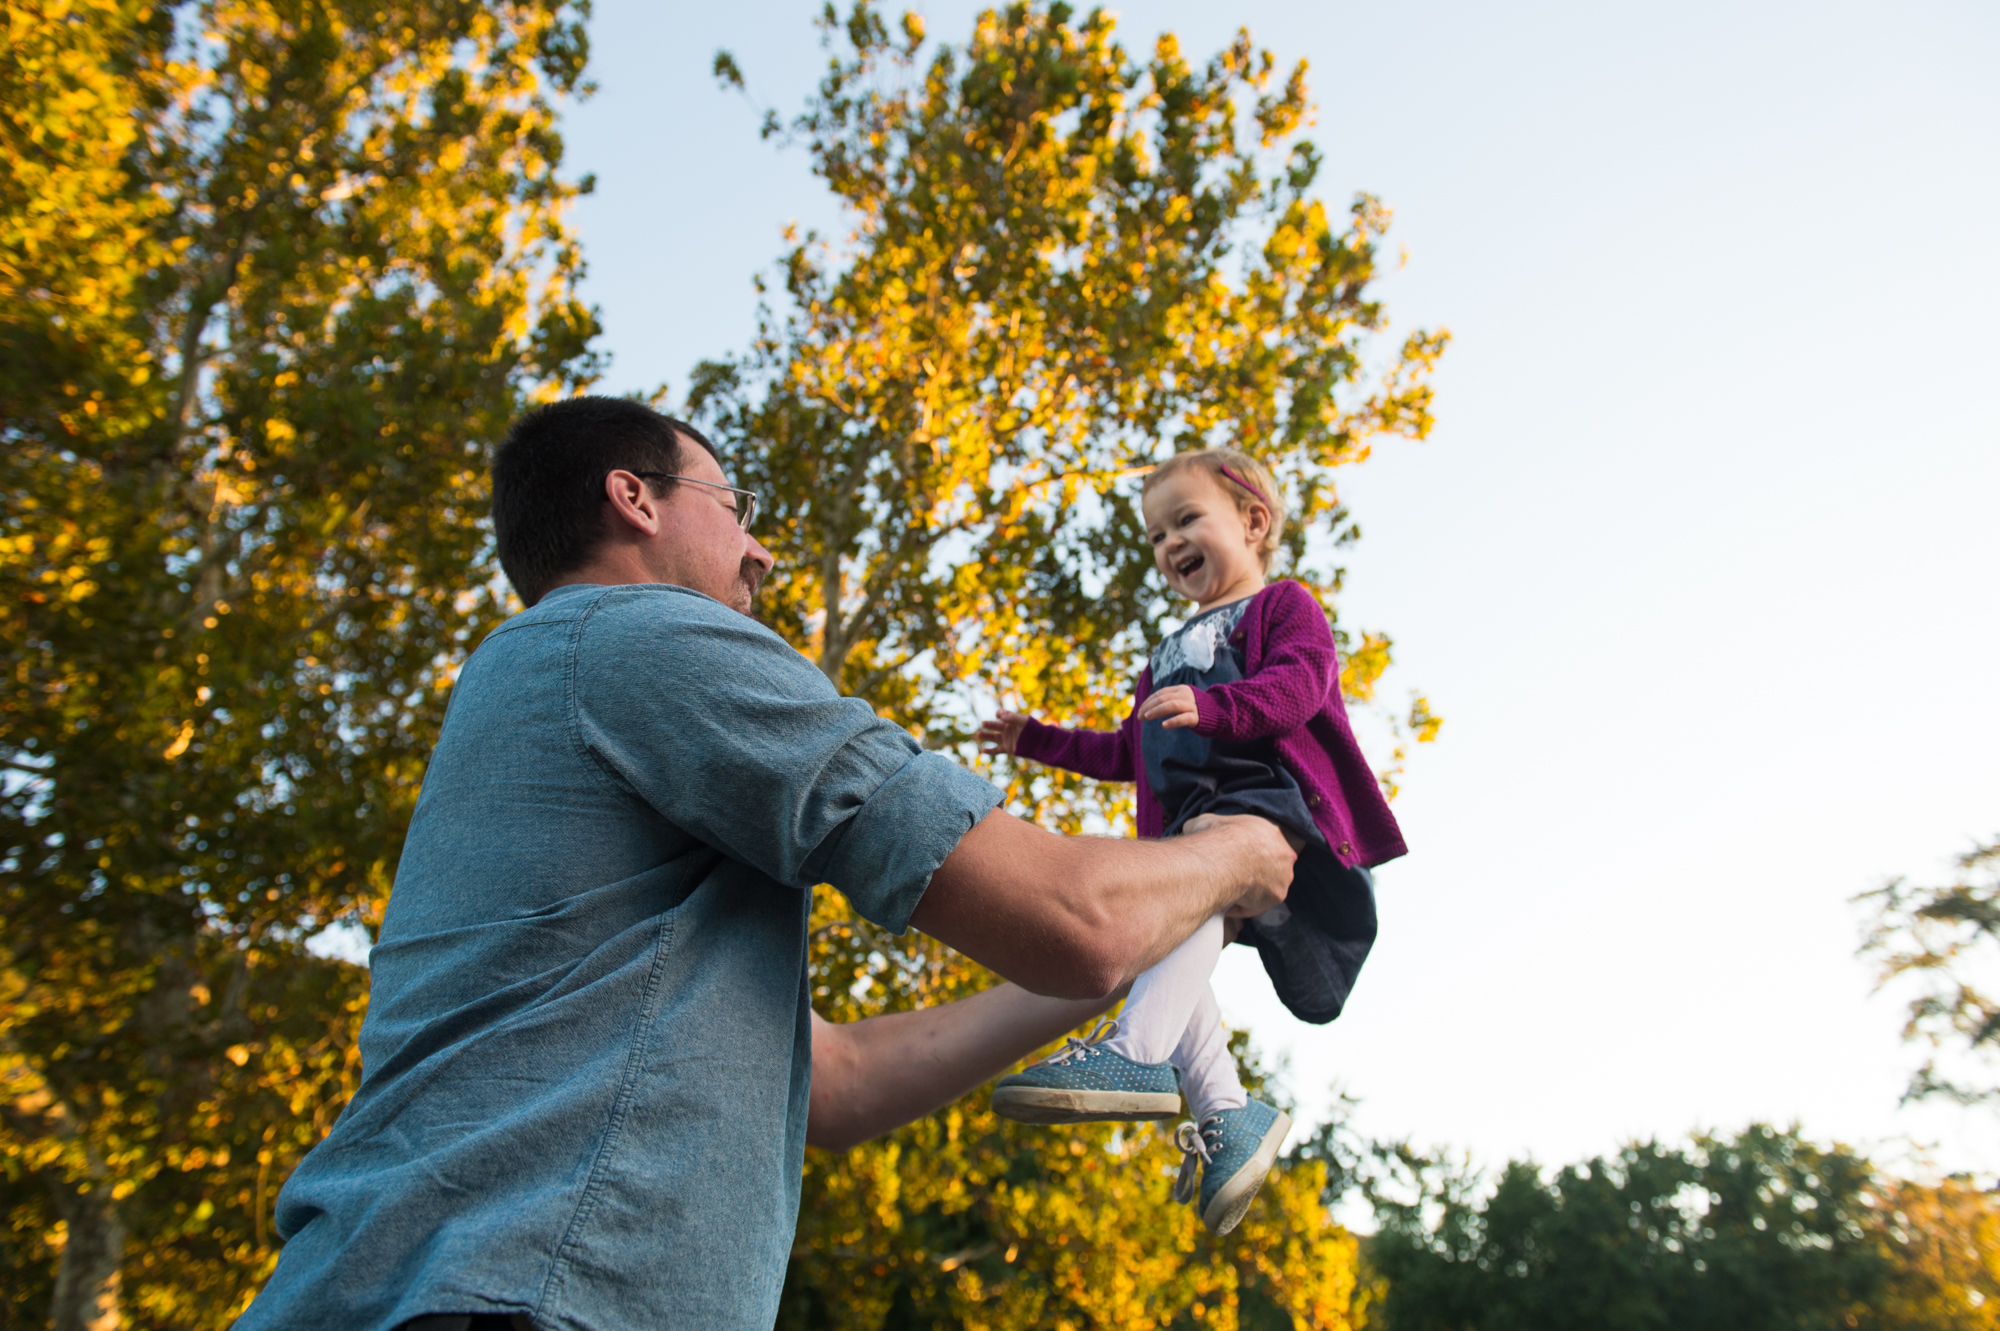 A father tossing his young daughter into the air during a family photo shoot